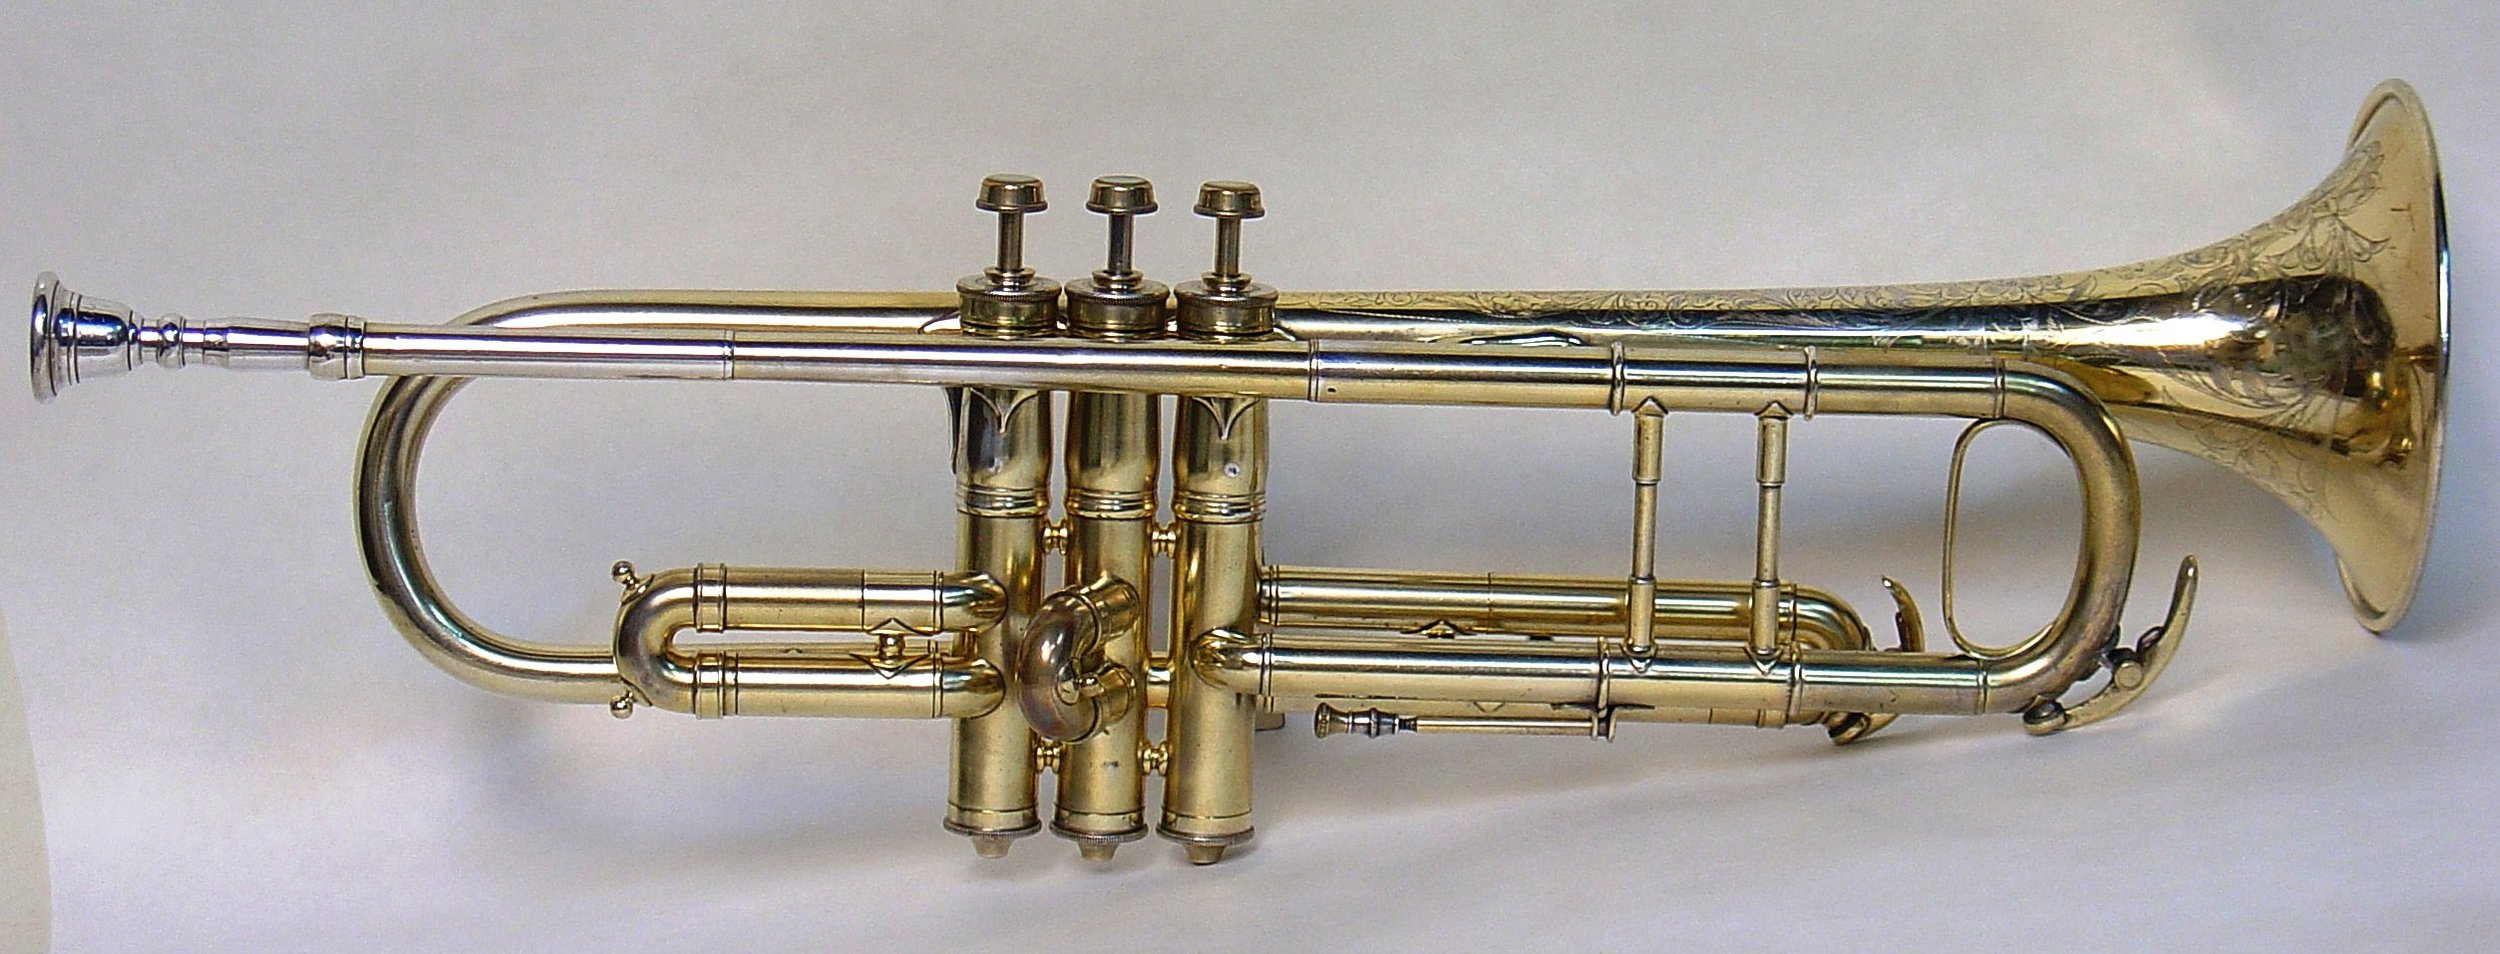 Early Conn Trumpet in Bb